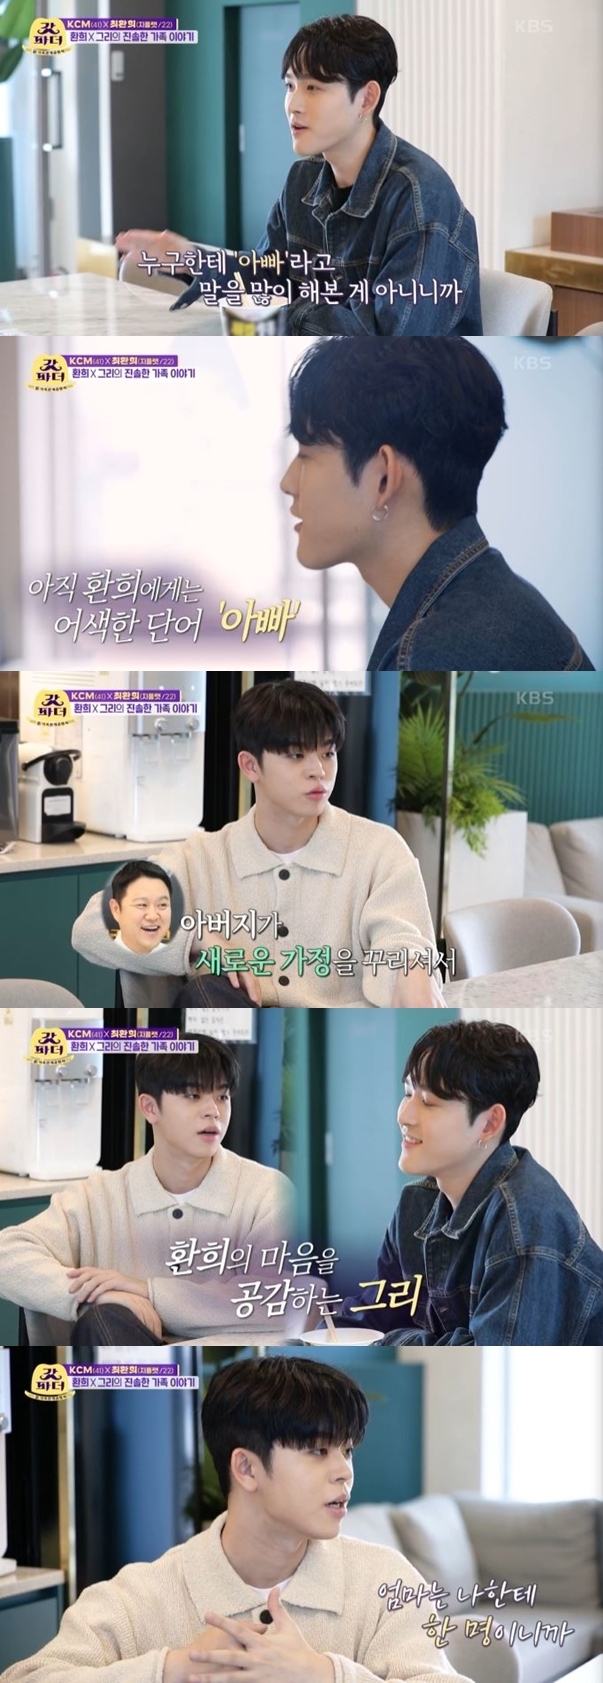 MC Grie sympathized with Hwanhees heart.On May 3, KBS 2TV New Family Relationship Certificate The Last Godfather depicted Hwanhee and MC Grie talking about their parents.On this day, Hwanhee talked about the appreciation of KCM as a father. Unlike himself, he said, I have an active aspect, I laugh more and brighten.I think Chang-mo is a person who wants to be with me for a long time. I think a good person has come into my life.MC Gri asked Hwanhee why he called KCM his brother. Hwanhee said, I did not say much about Father.I have not done much as Father to anyone, he said, Confessions that the existence and word Father is awkward.